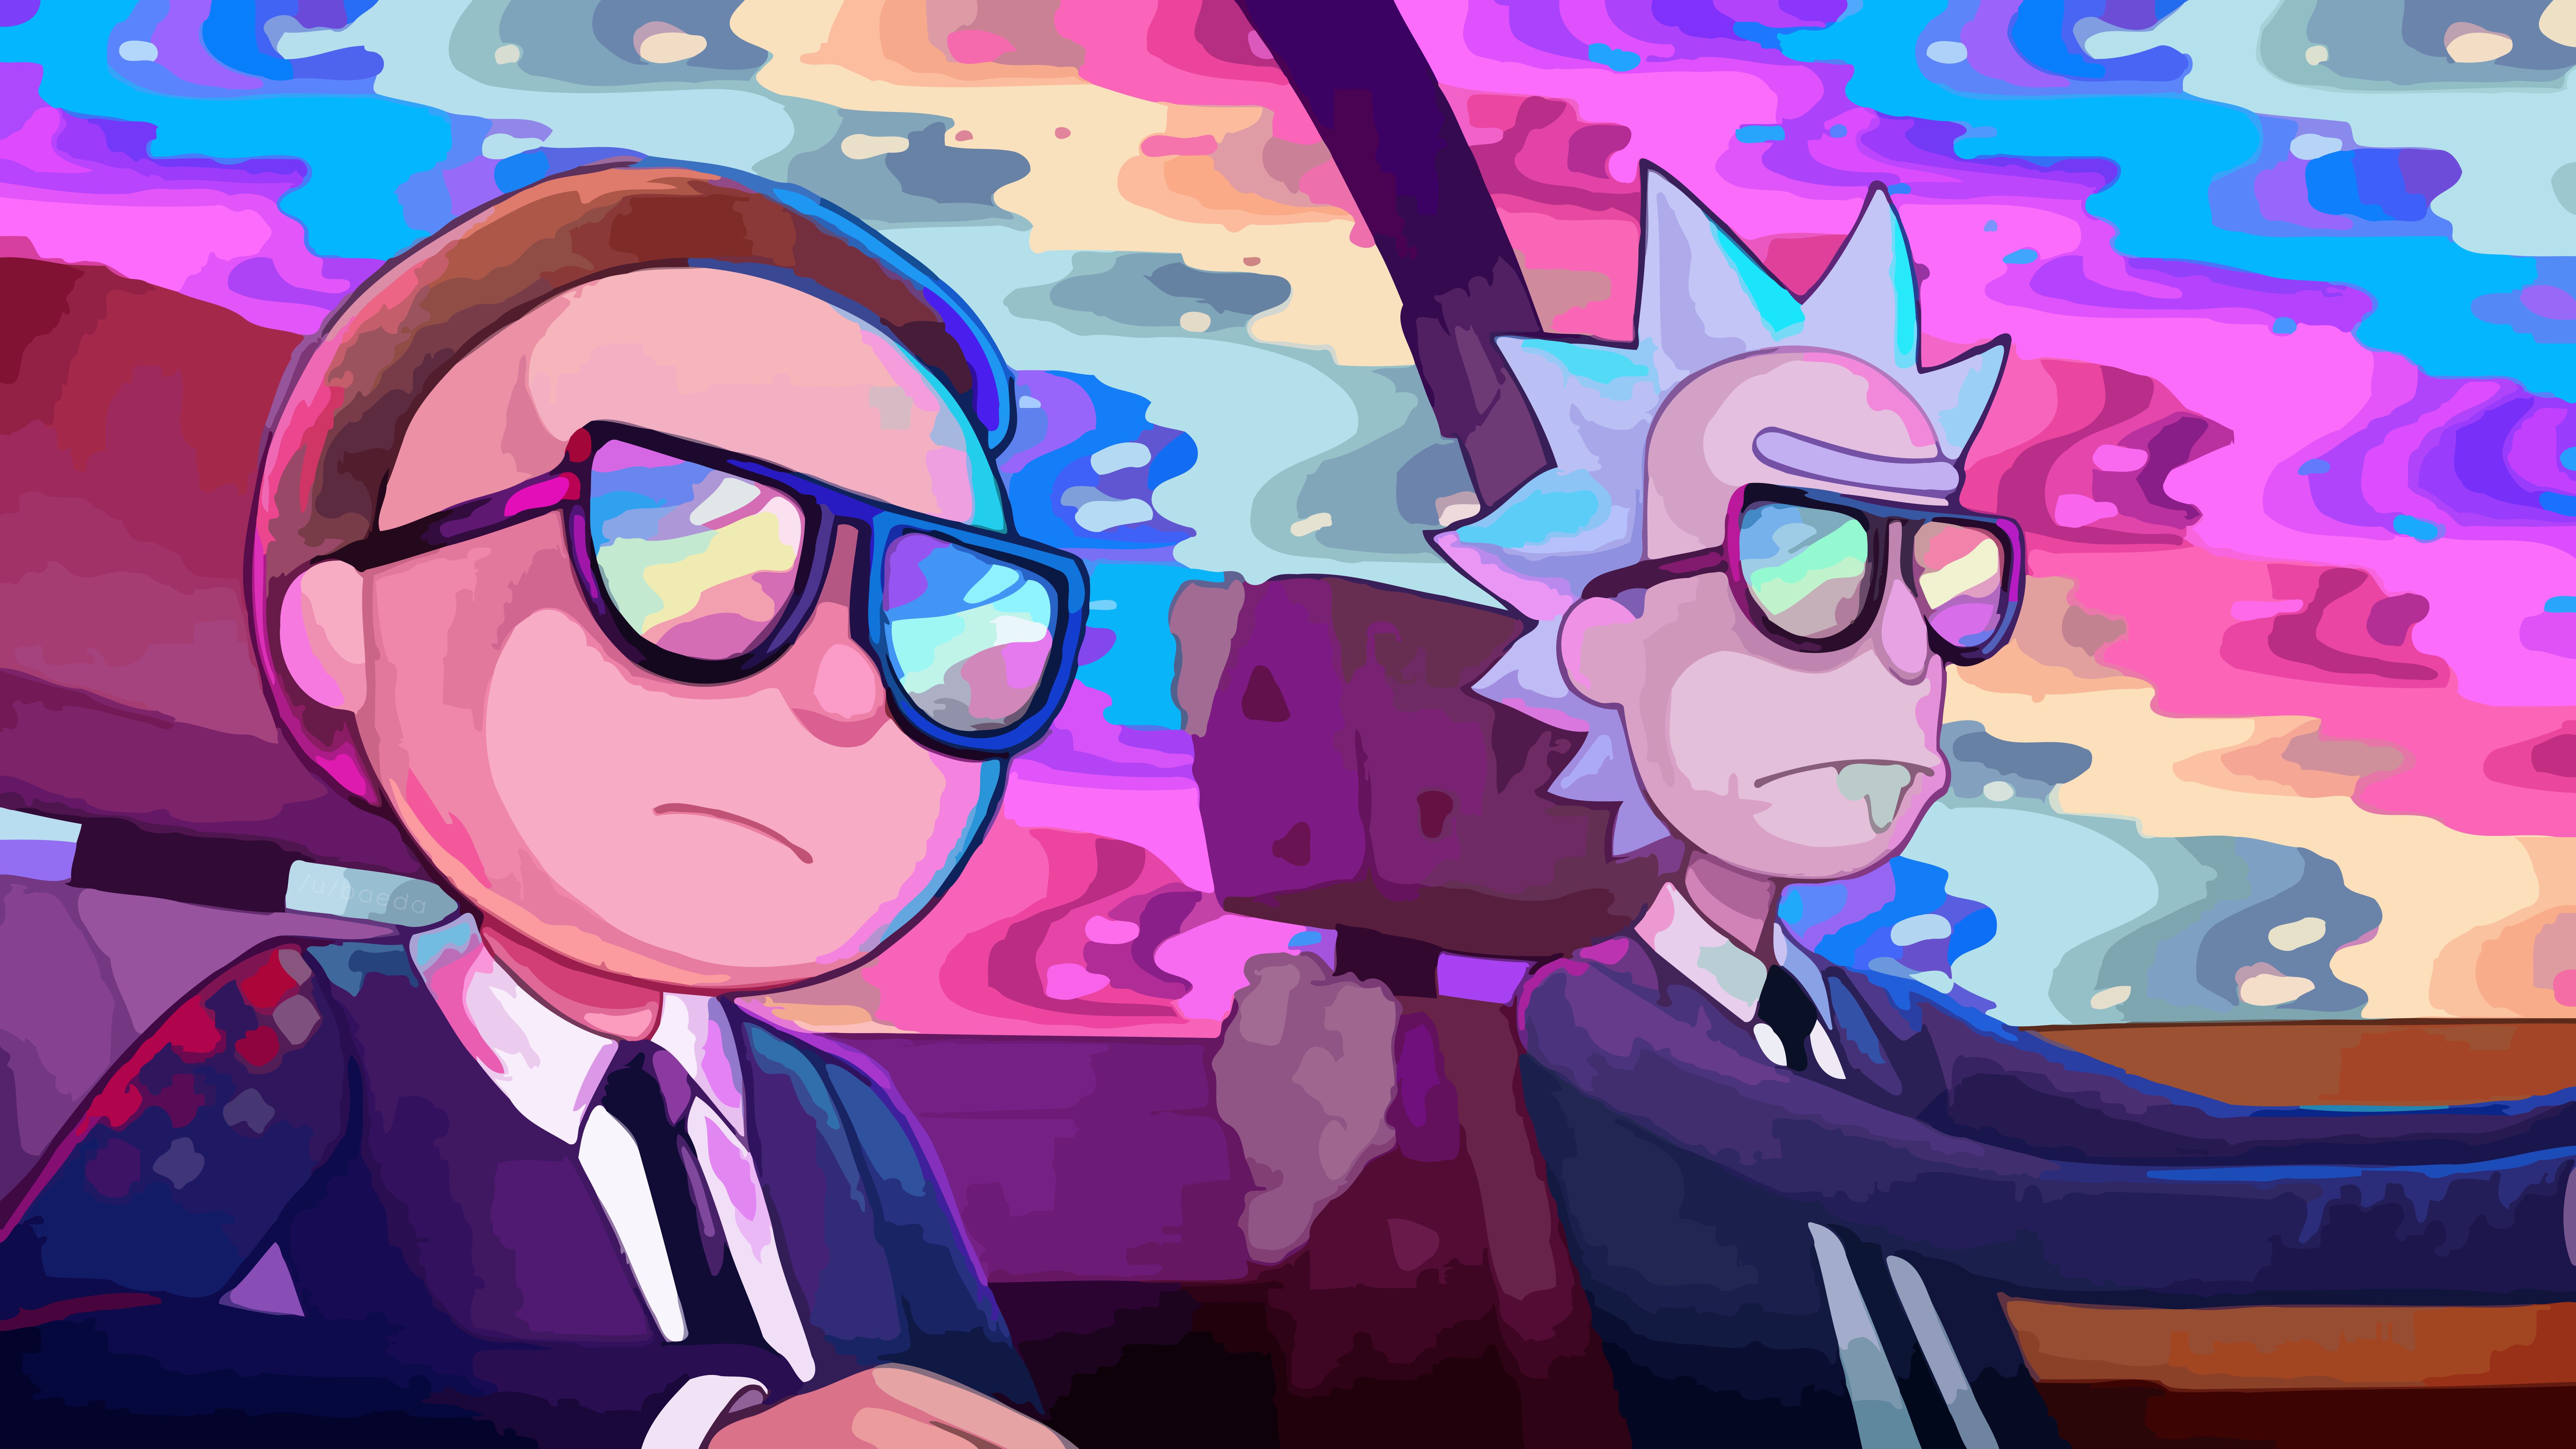 Download rick and morty s for ile phone free rick and morty hd pictures